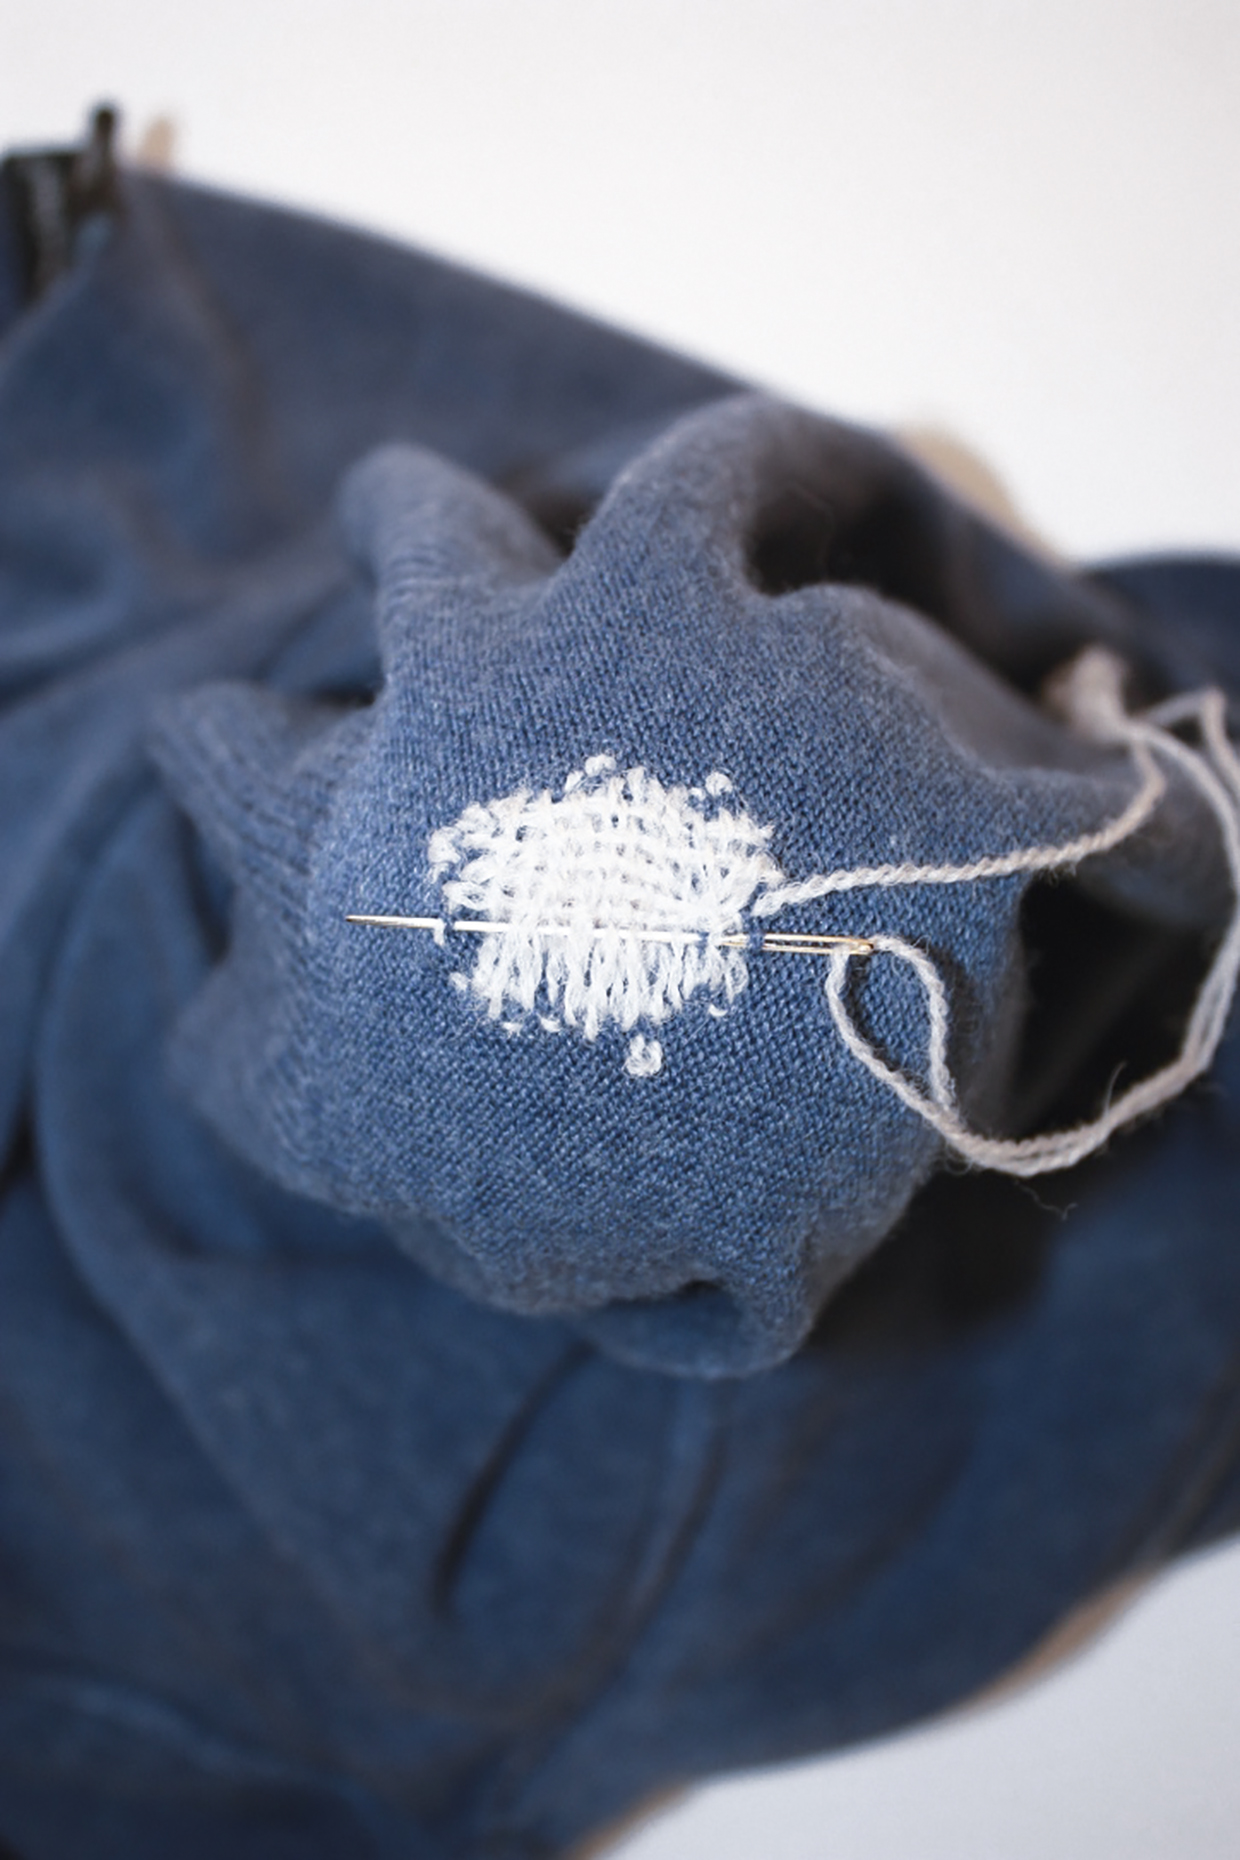 Mending Clothes: Creative Ways to Sew a Hole, Mend a Seam, and Beyond